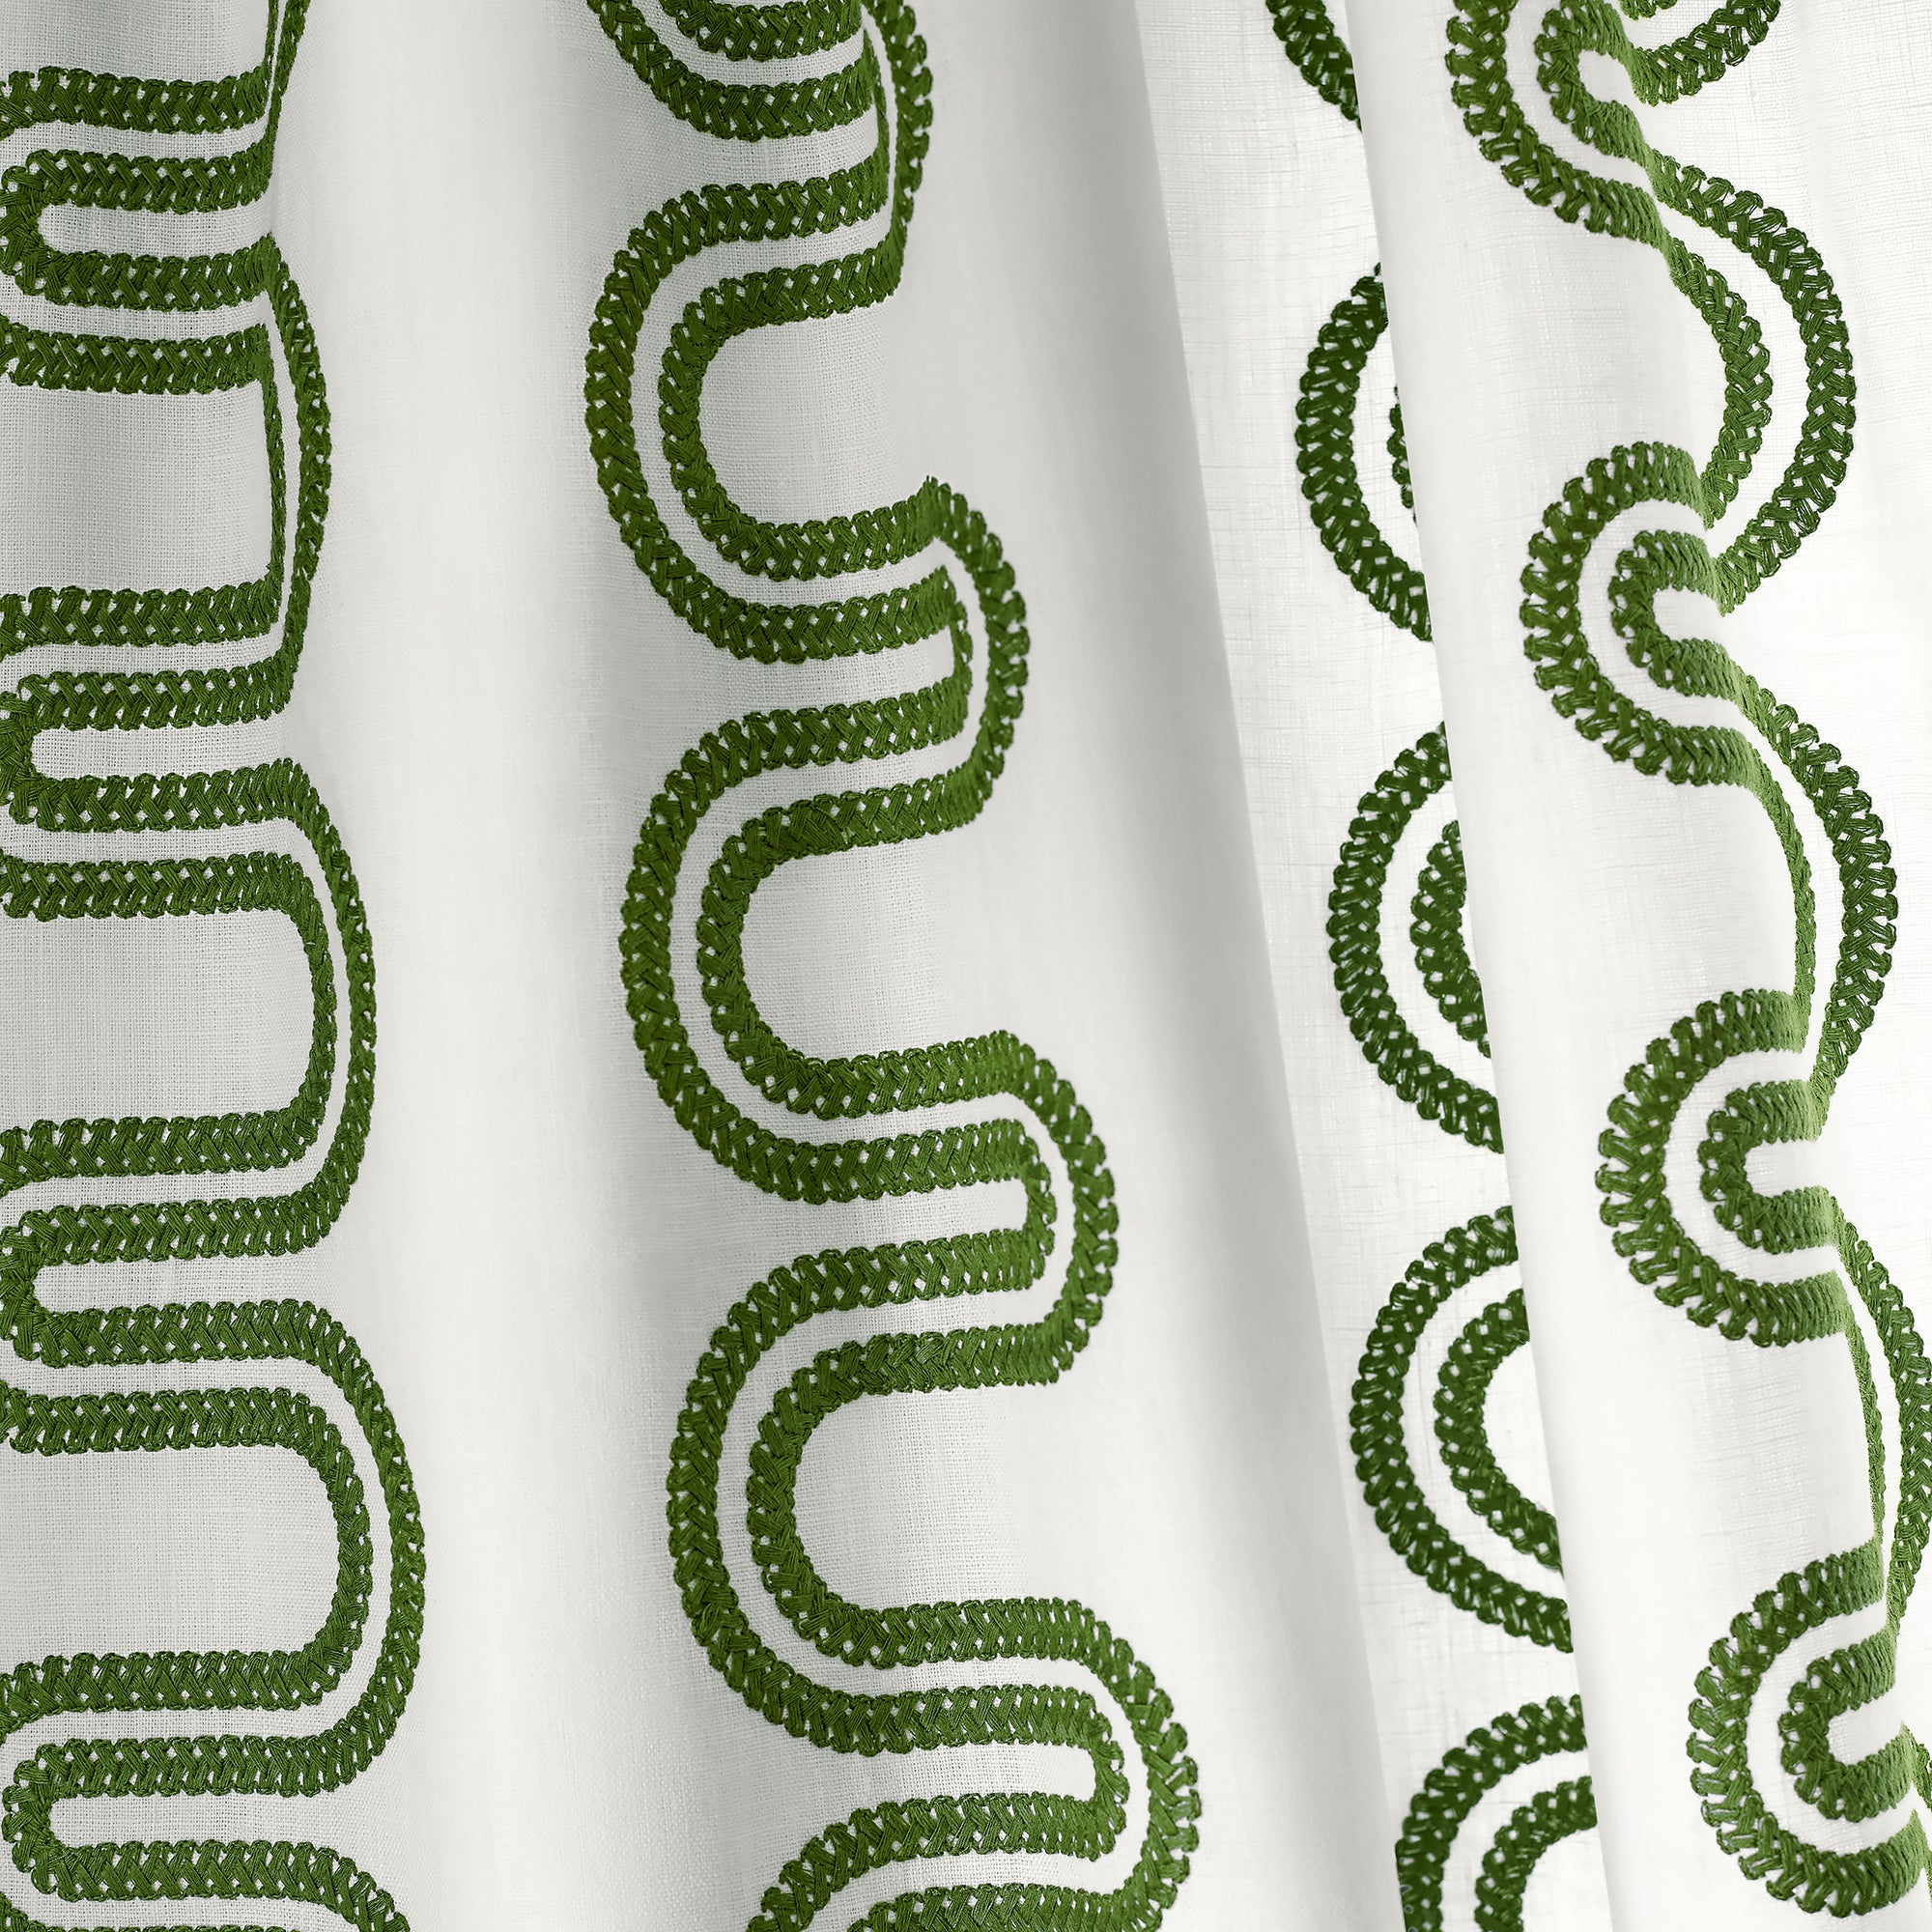 Detail of Drapery in Herriot Way Embroidery in Green and White - pattern number AF9635 - by Anna French